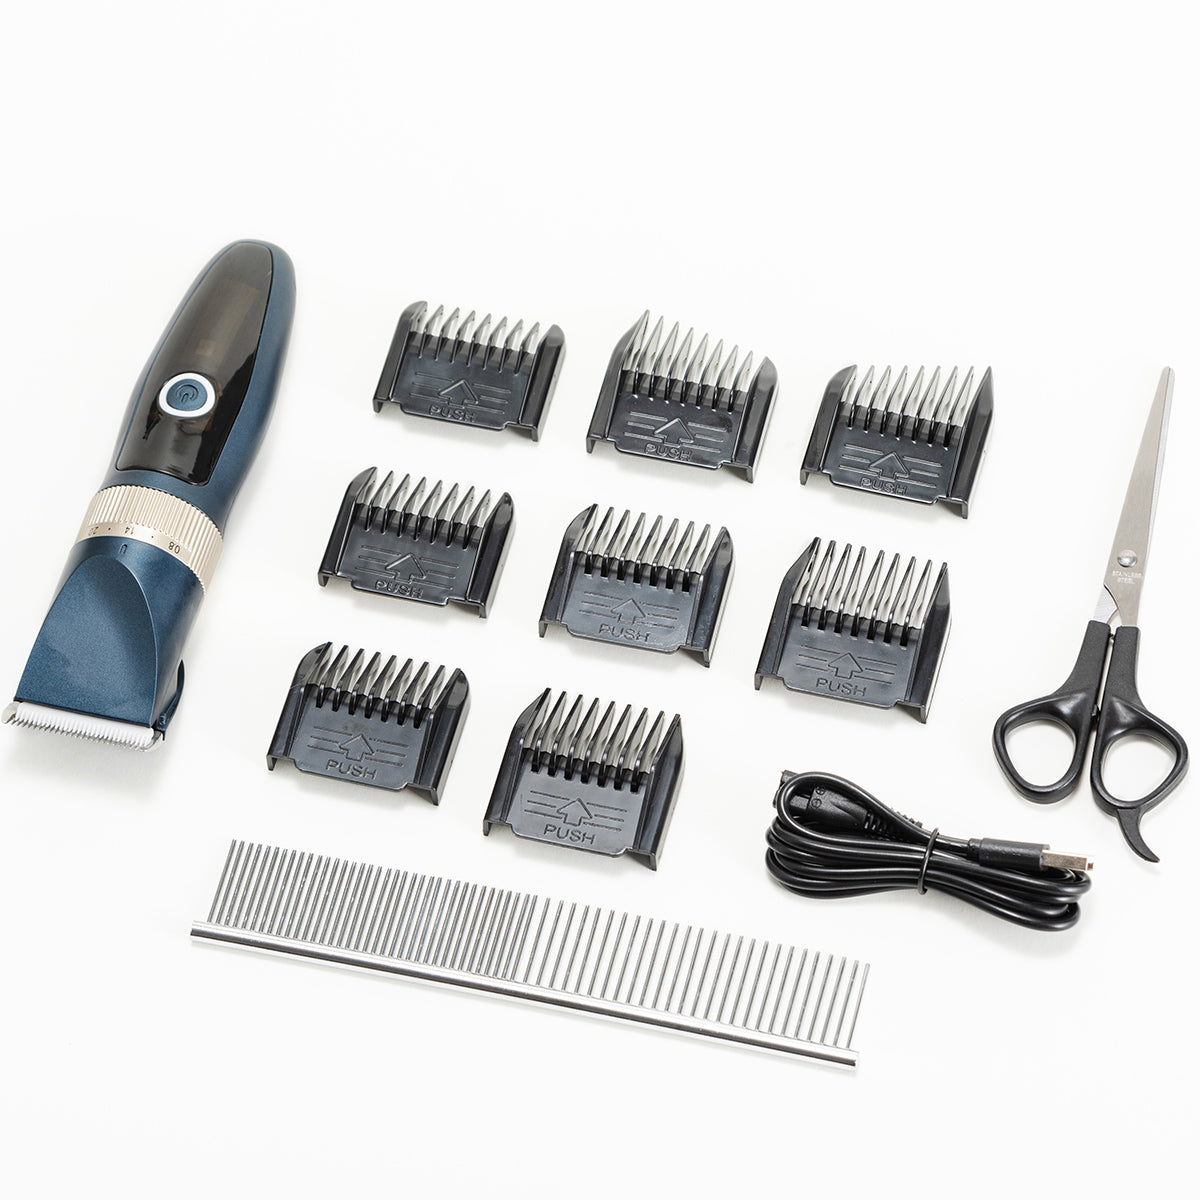 Hair Trimmer Set With Replaceable Accessories